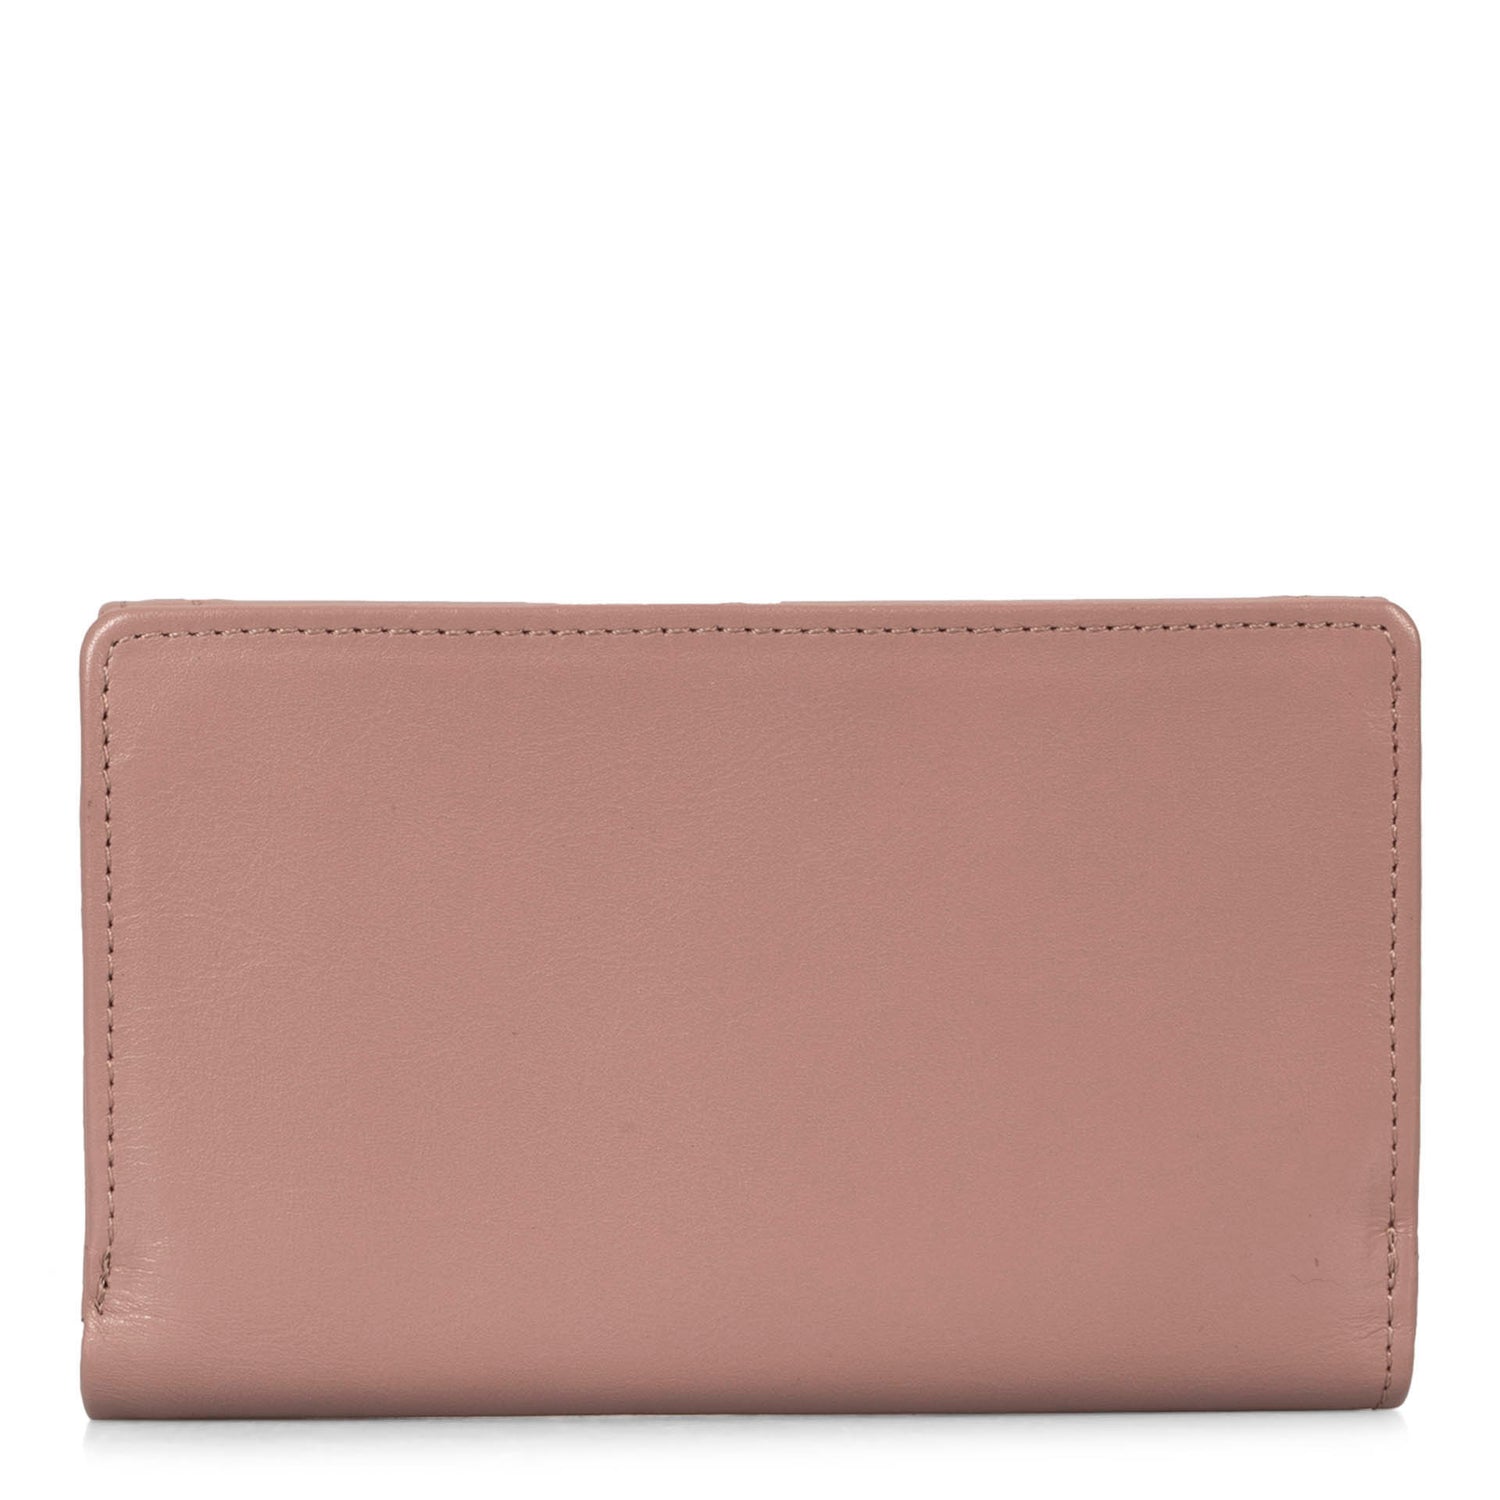 Back side of a taupe flap wallet for women called Kara designed by Tracker showing its soft leather.